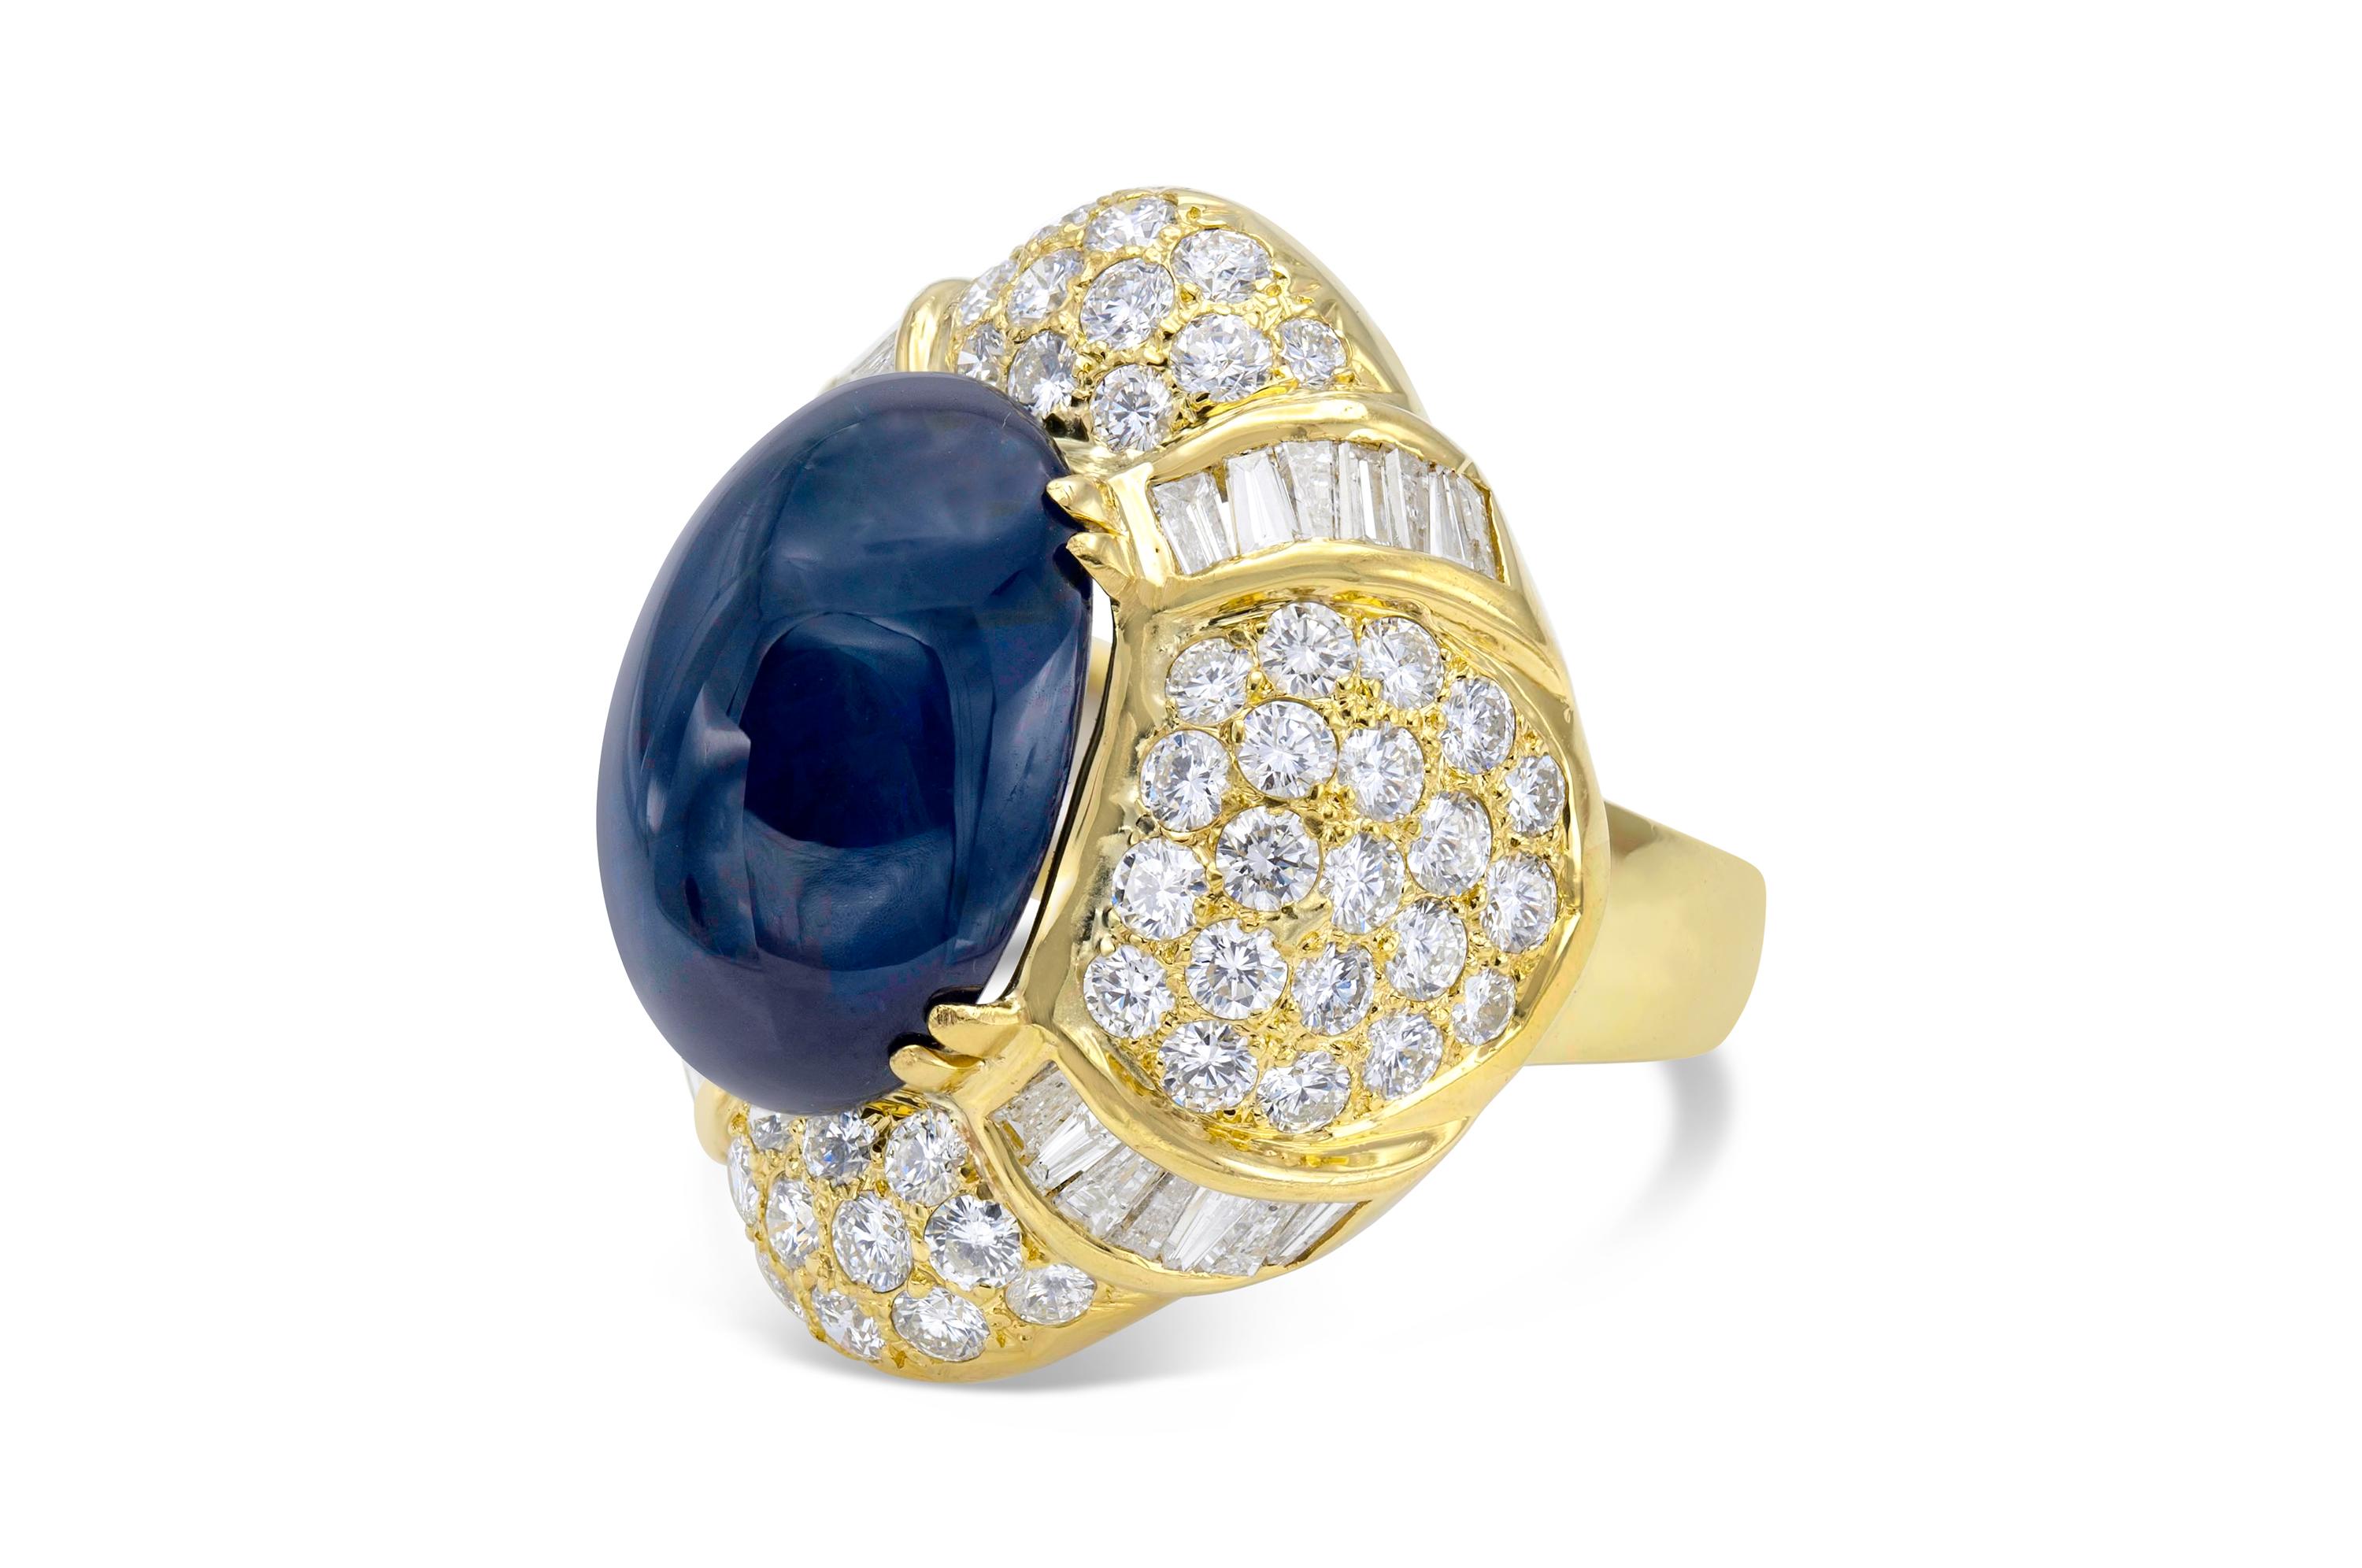 Finely crafted in 18k yellow gold with an AGTA certified 22.79 carat Cabochon Sapphire.
The ring features round and baguette-cut diamonds weighing approximately a total of 7.00 carats.
Size 7 1/2, resizable